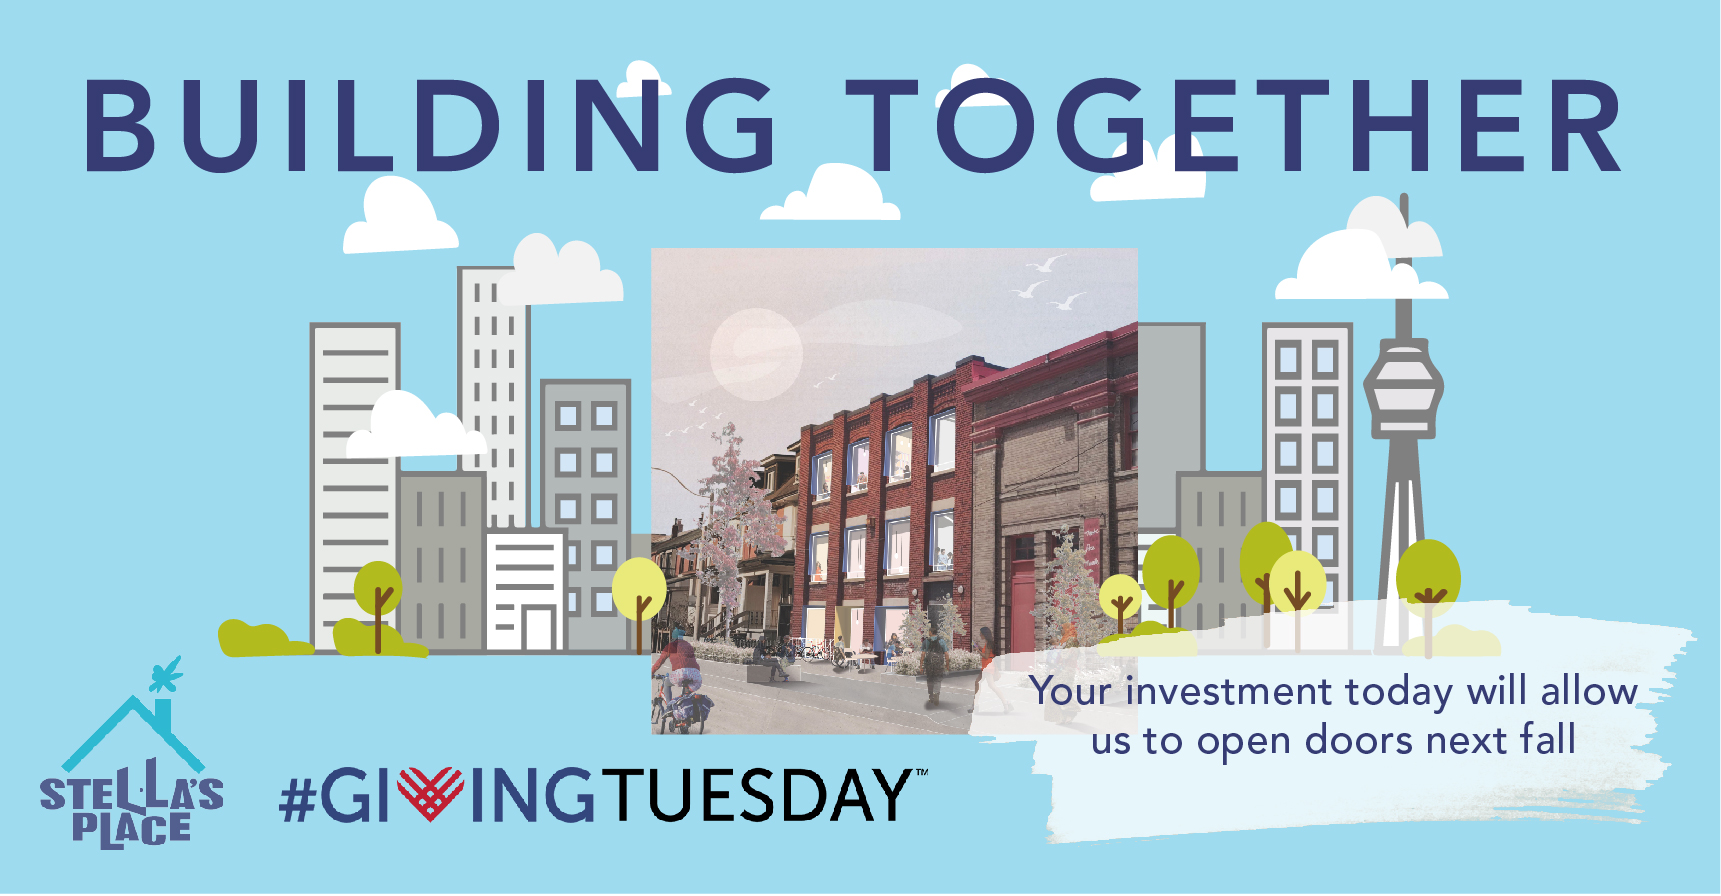 An illustrated graphic of the new building. The background is baby blue and there is a square rendered image of the new building overlayed on a small cartoon skyline with buildings and the CN tower. Floating above are small fluffy white clouds. At the top it reads "Building Together" in the bottom left is the Stella's Place logo and the Giving Tuesday logo. In the bottom right it says "Your investment today will allow us to open doors next fall" overlayed on a white paint swipe.